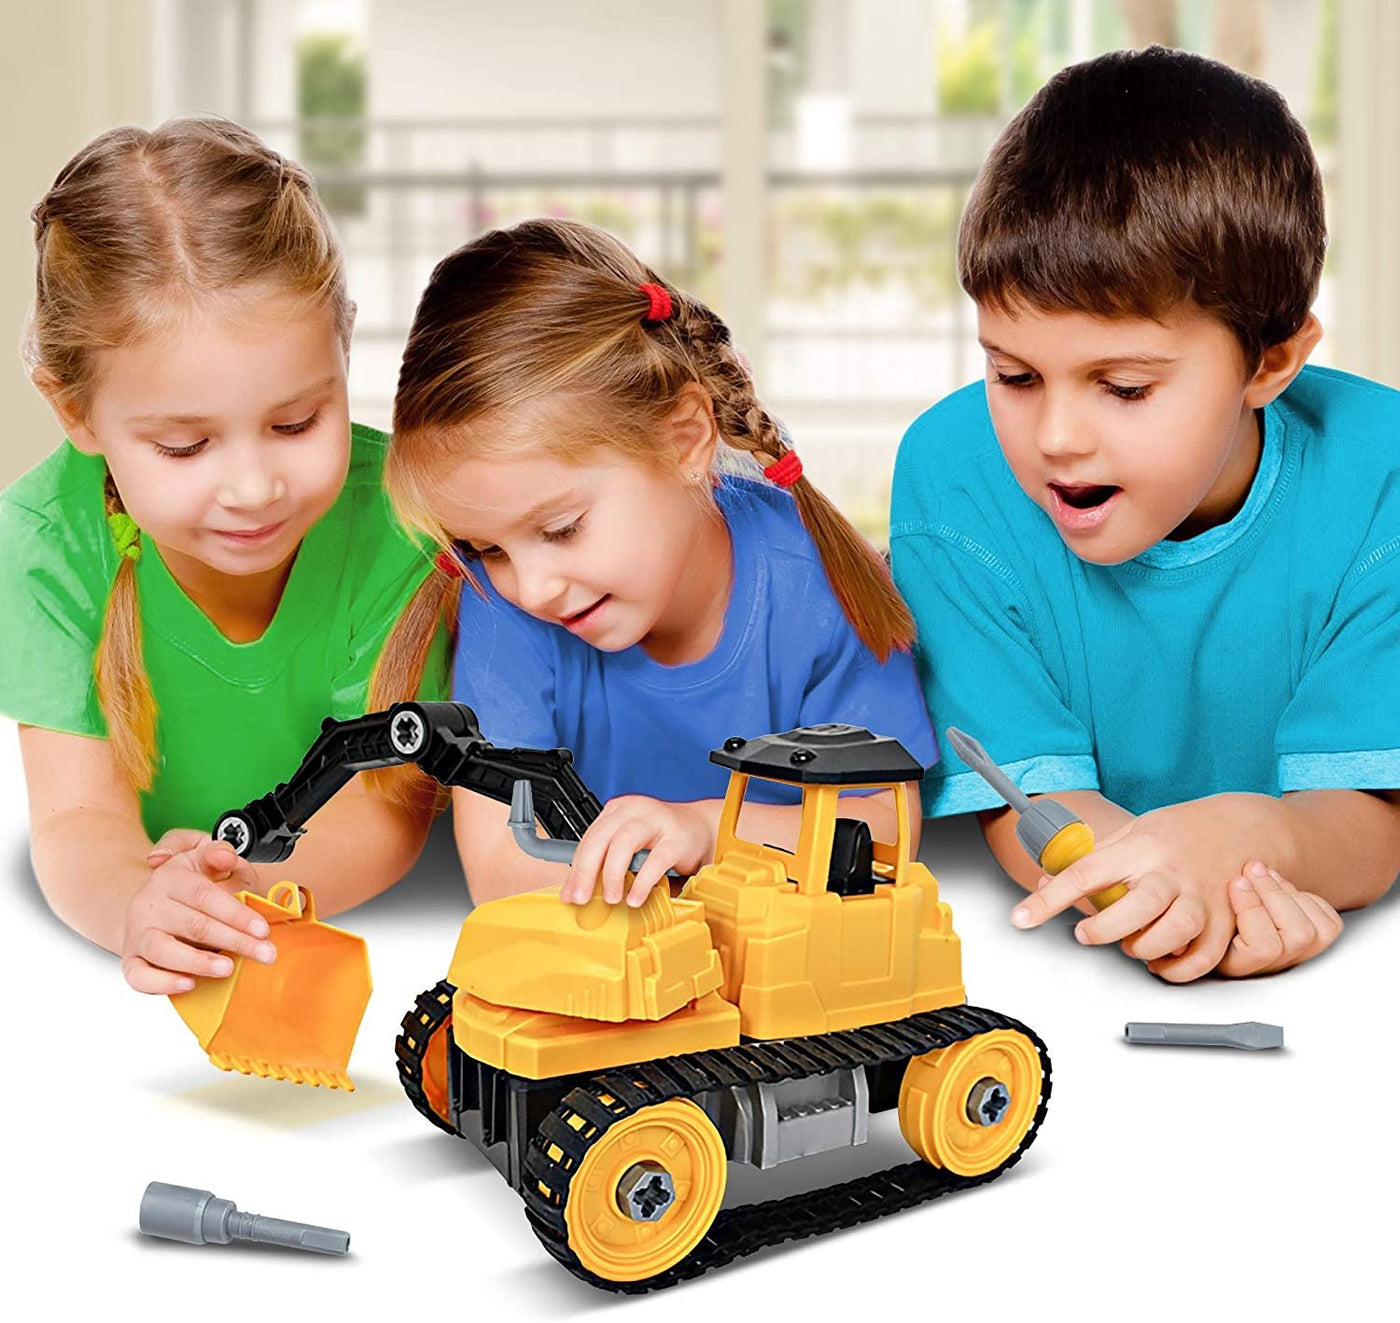 Take Apart Yellow Construction Toy Truck - 43 Pieces with Tools - Large Excavating Backhoe Toy - Perfect Digger Toy and Great Birthday Gift Idea for Boys and Girls Ages 3+